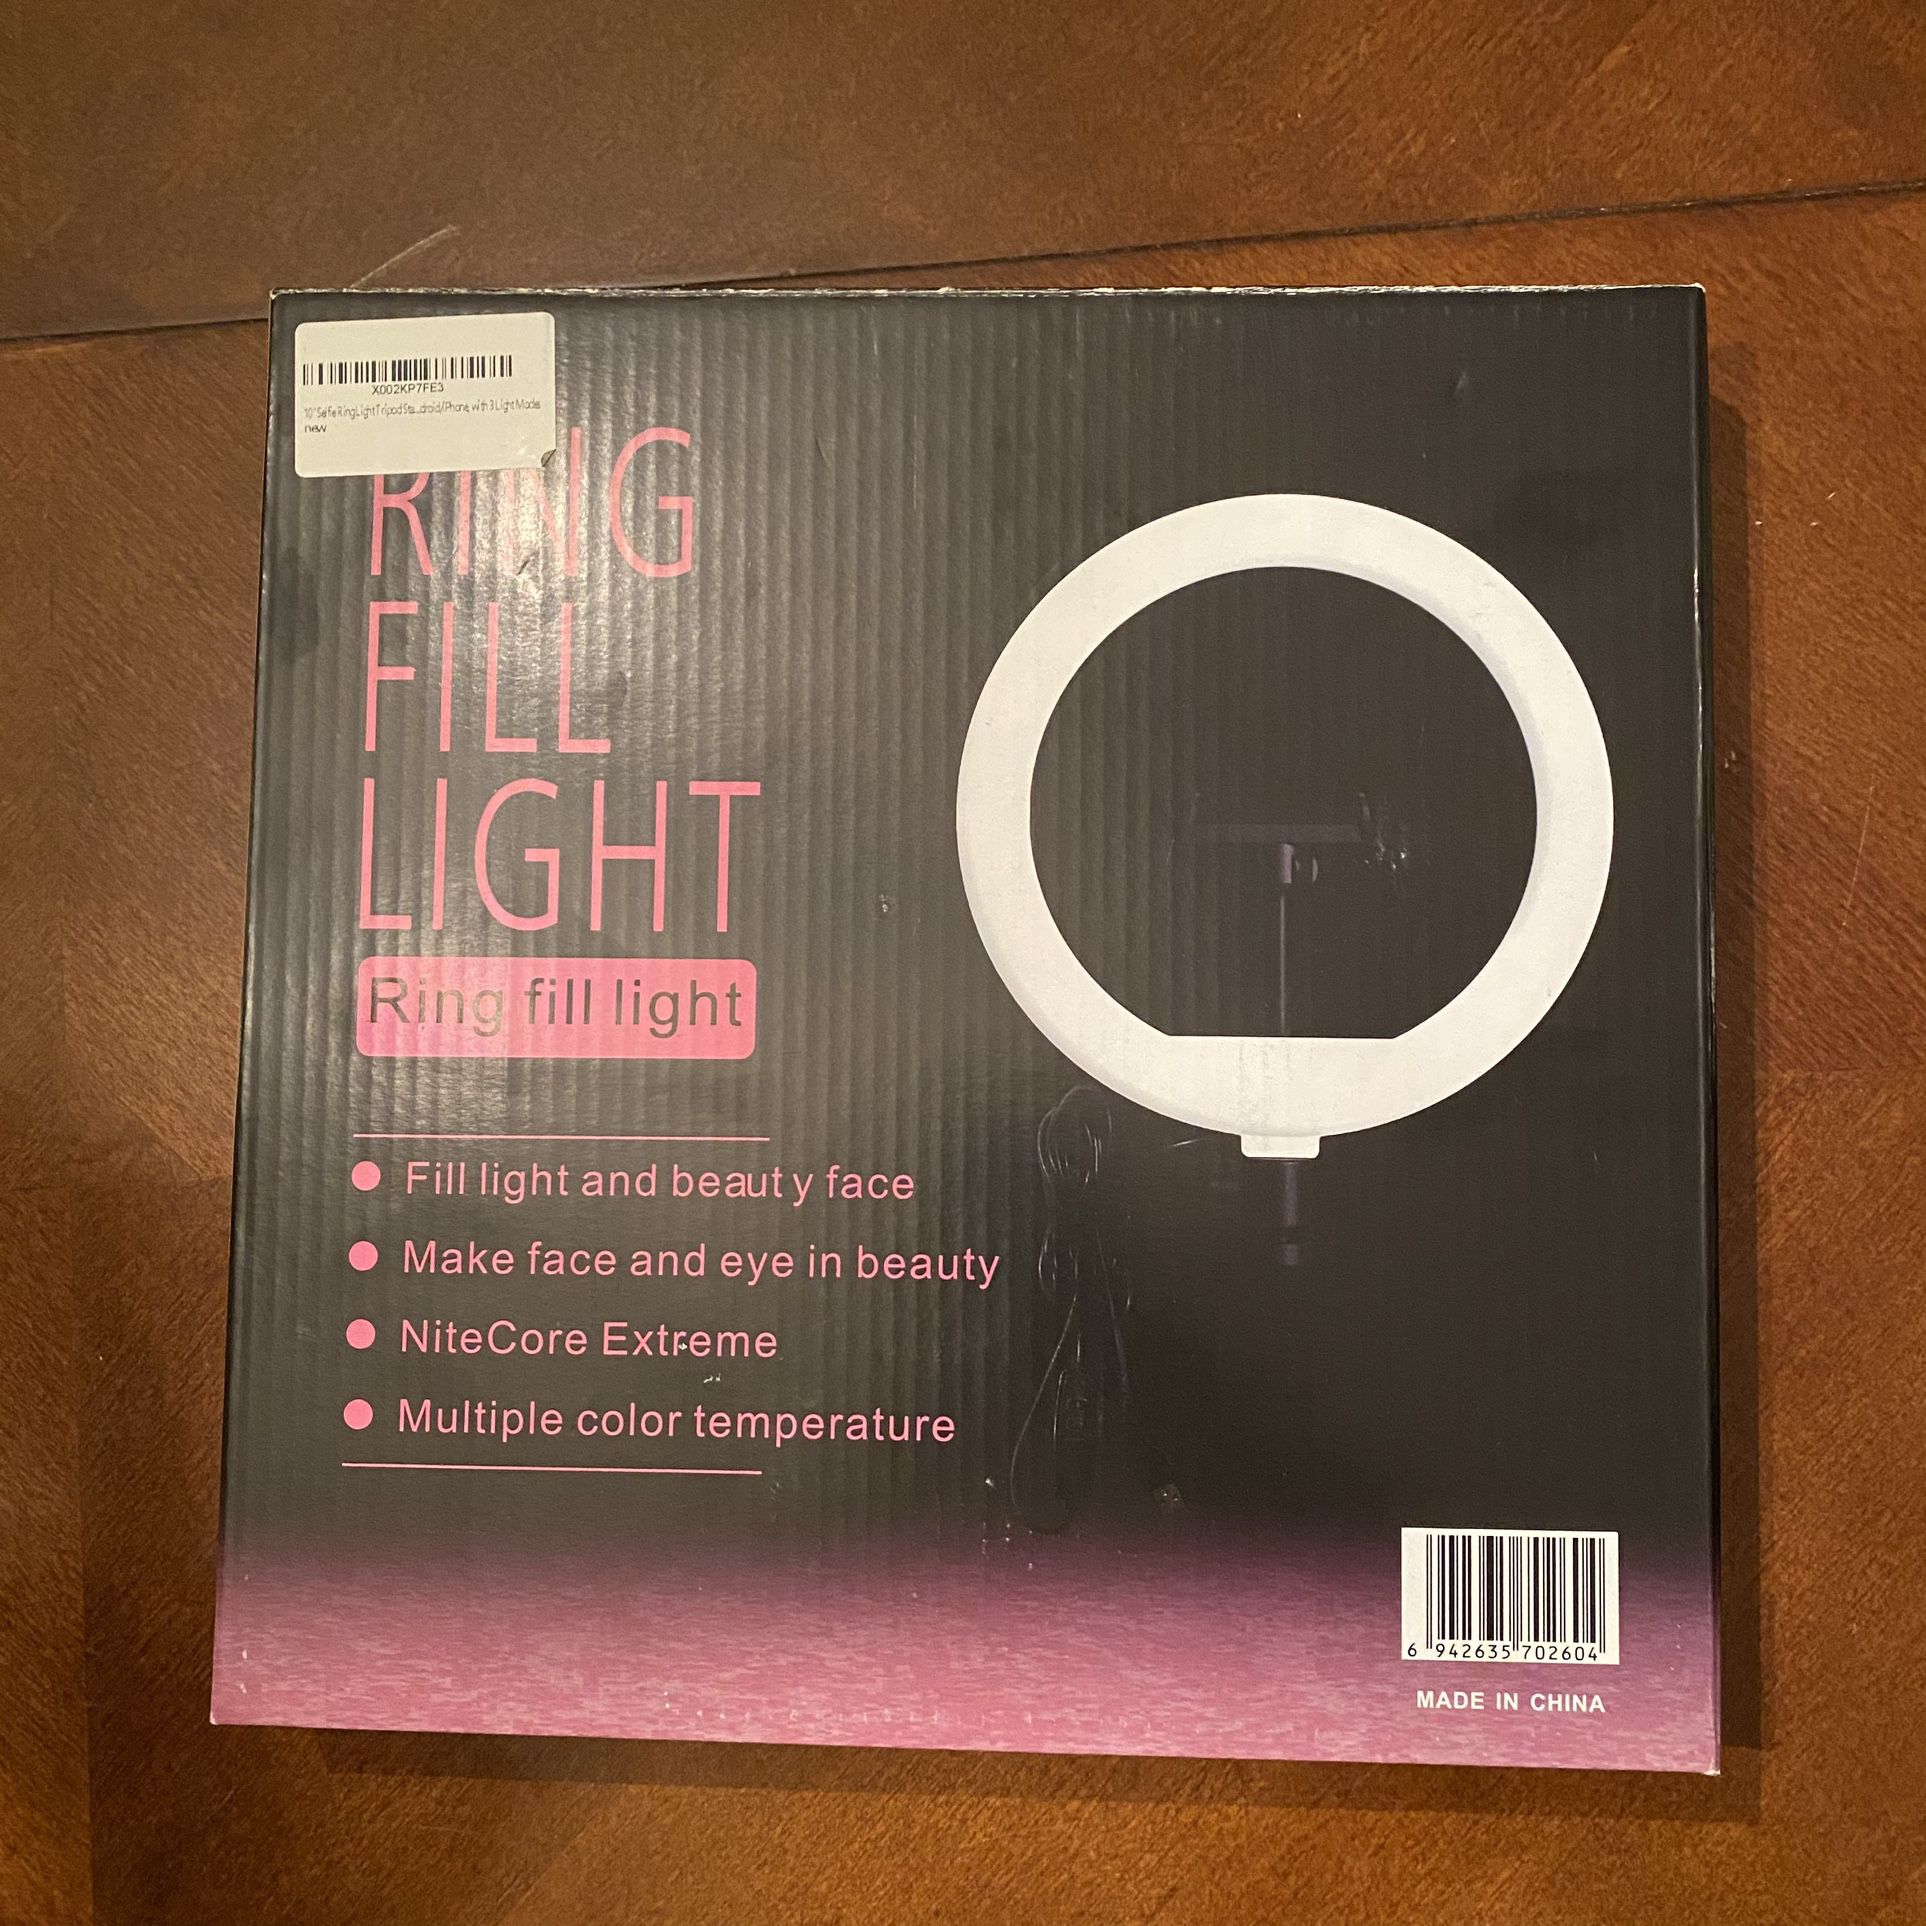 LED Selfie Ring Light 10.2 inches w/ Tripod and Remote